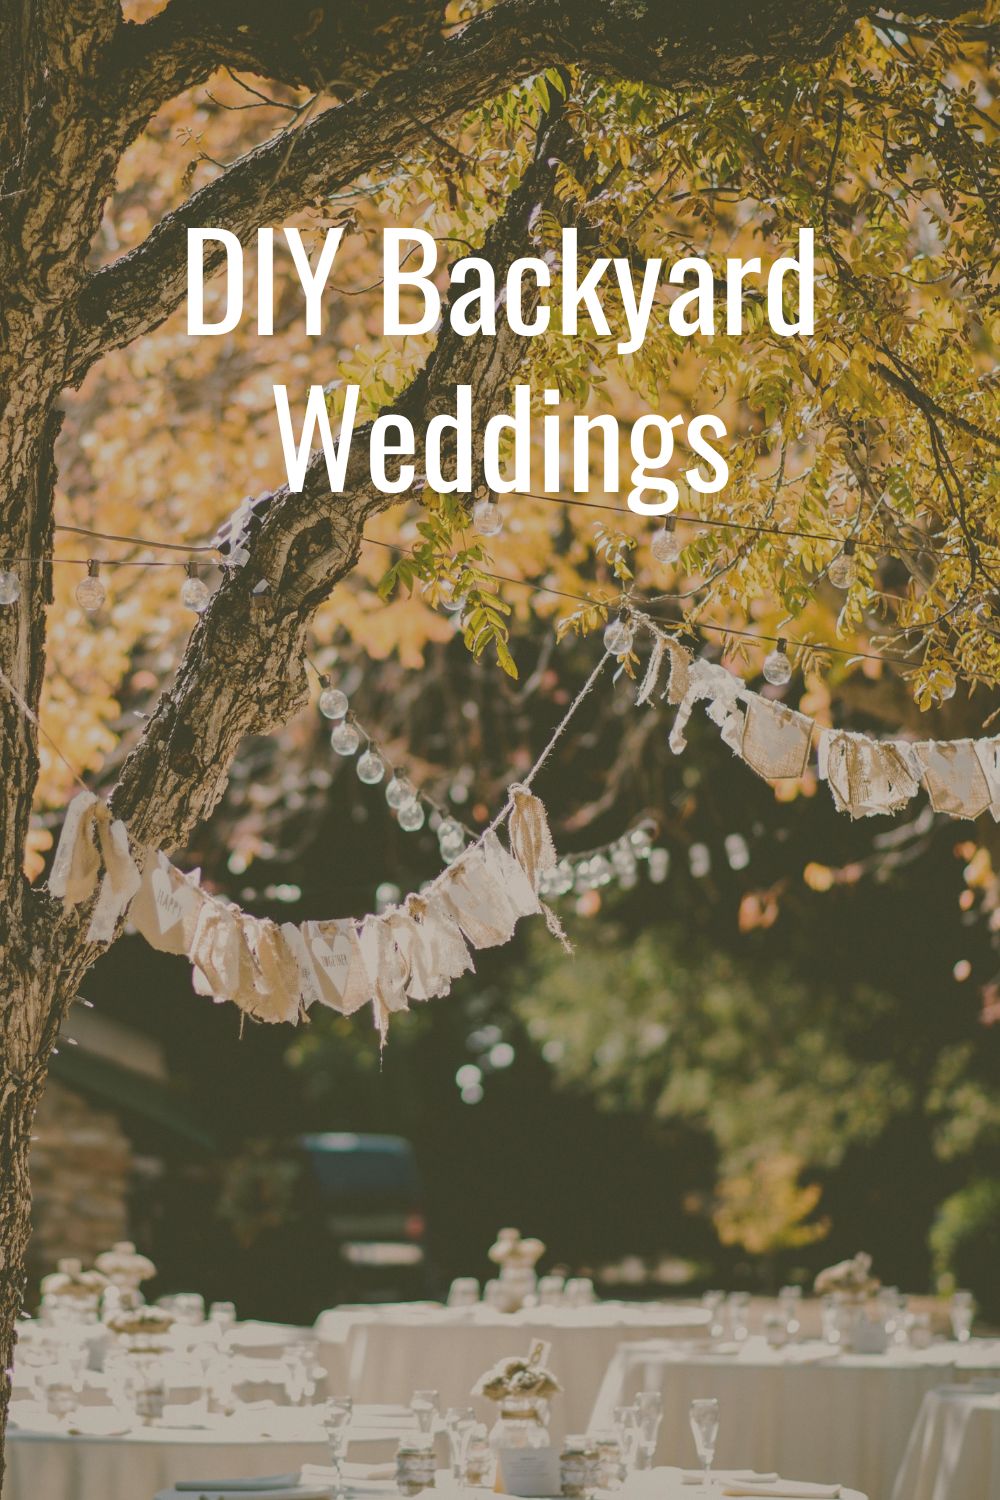 DIY backyard wedding with tables and swags.